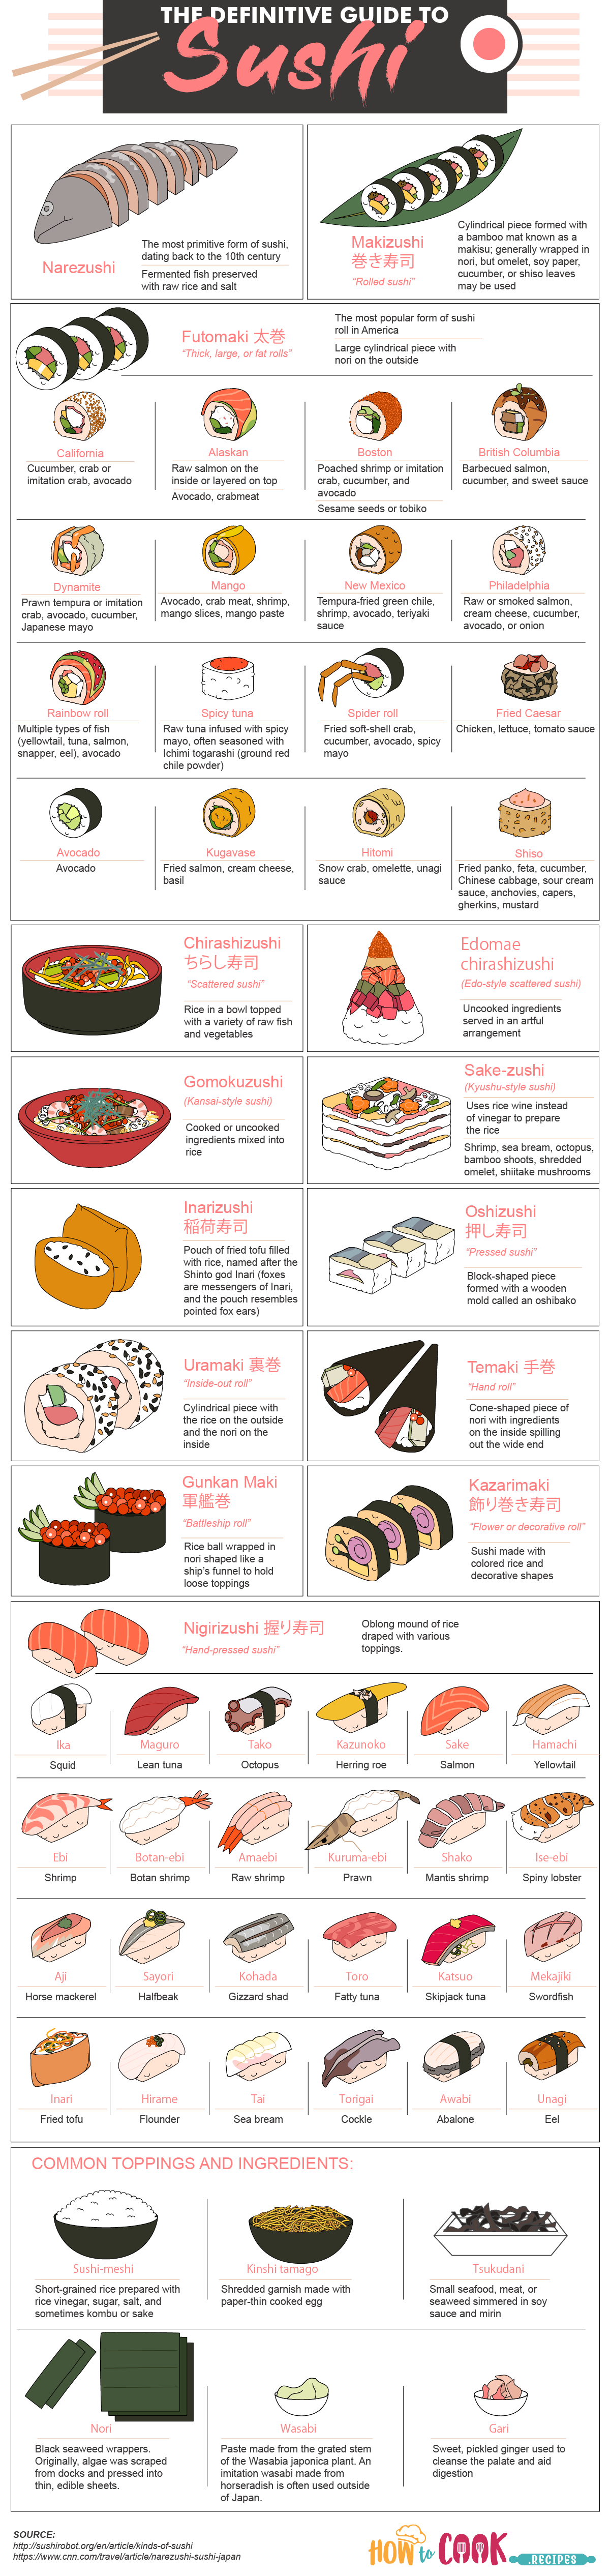 Sushi Rolling: A Step-by-Step Guide